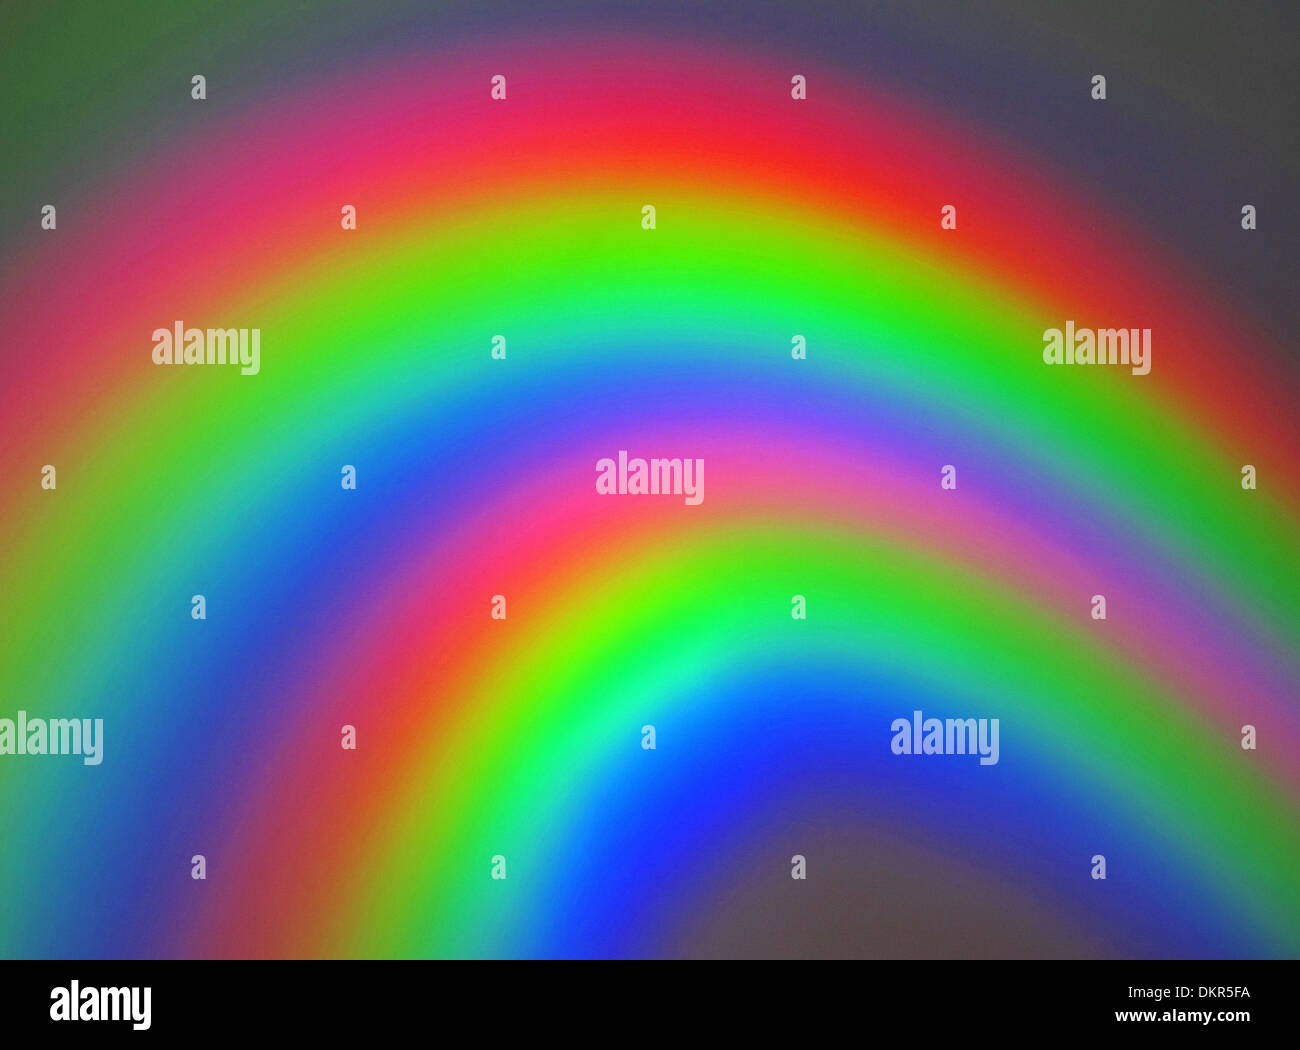 Colors, rings, spectral colors, rainbow colors, alienated, brightly, concepts, Stock Photo